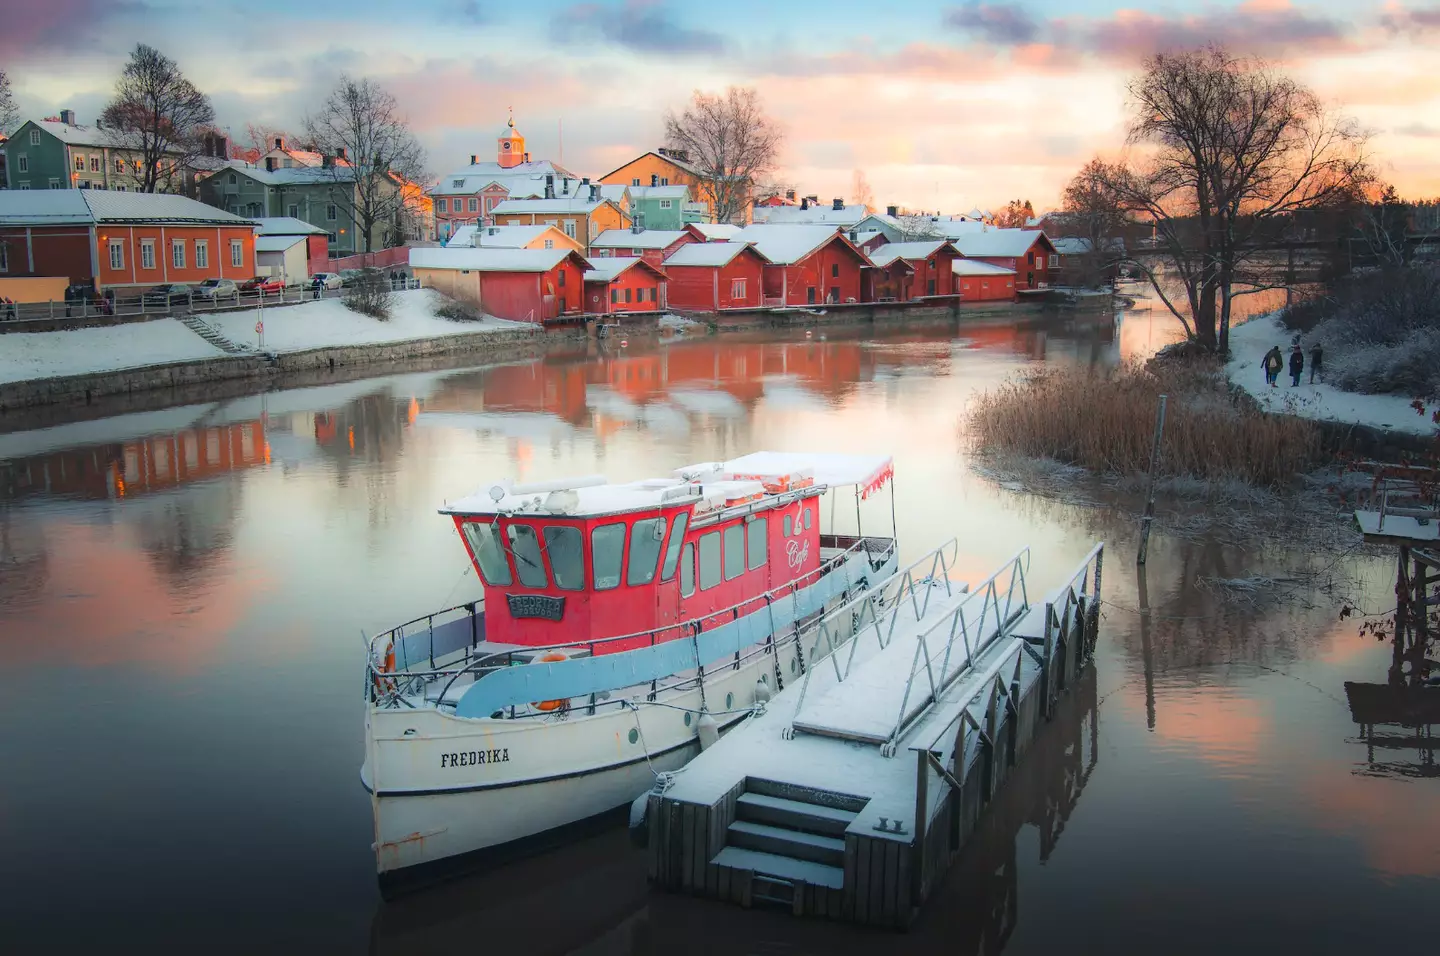 The picturesque town of Porvoo, Finland.